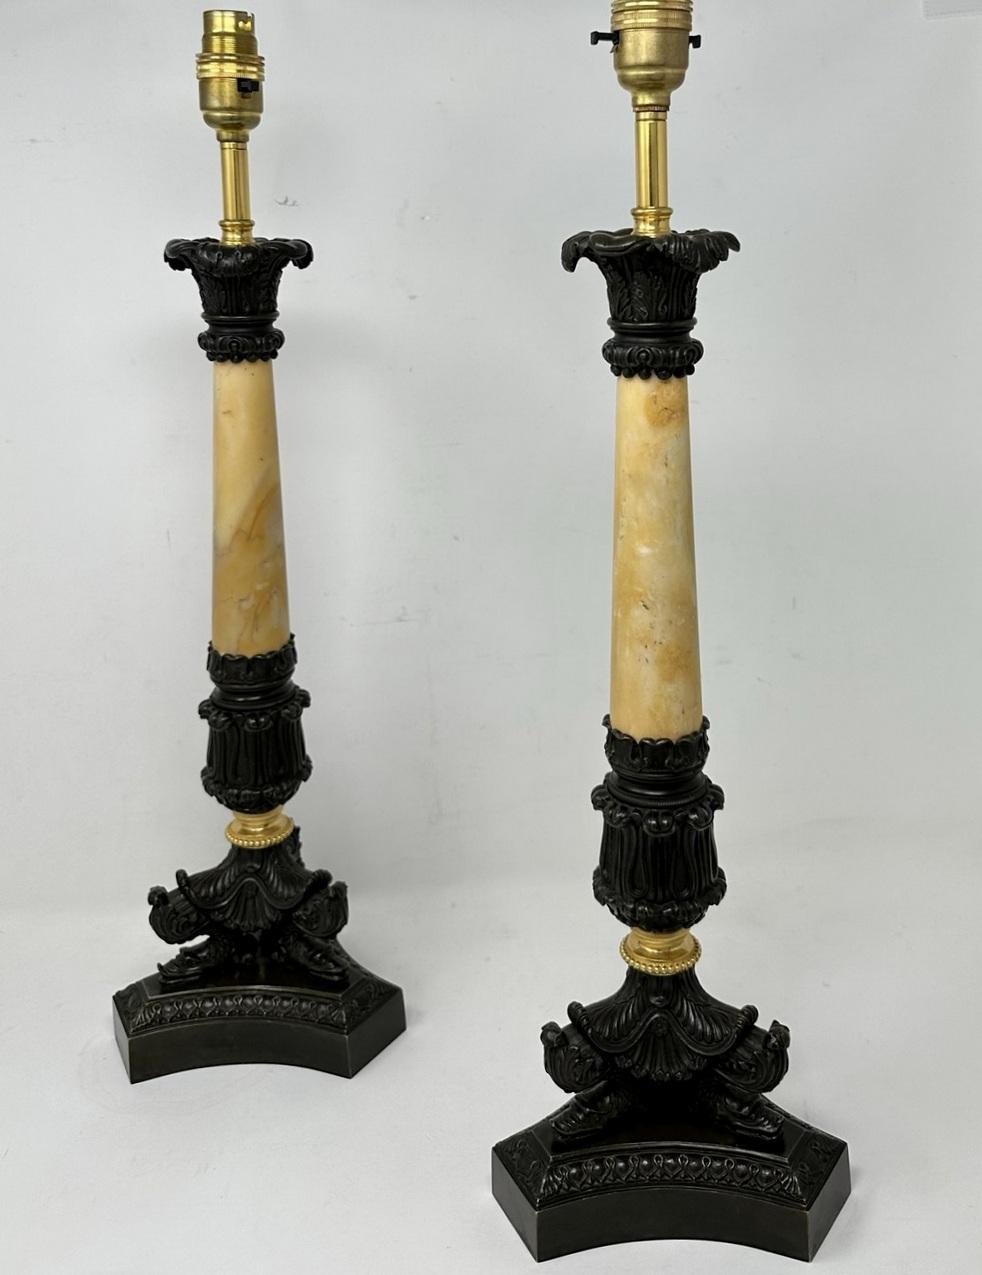 An Exceptionally Fine Pair French Ormolu and patinated Bronze early Victorian Single Light Candlesticks of quite tall and large proportions, now converted to a Stunning Pair of Electric Table Lamps, offered in exceptional condition, each with